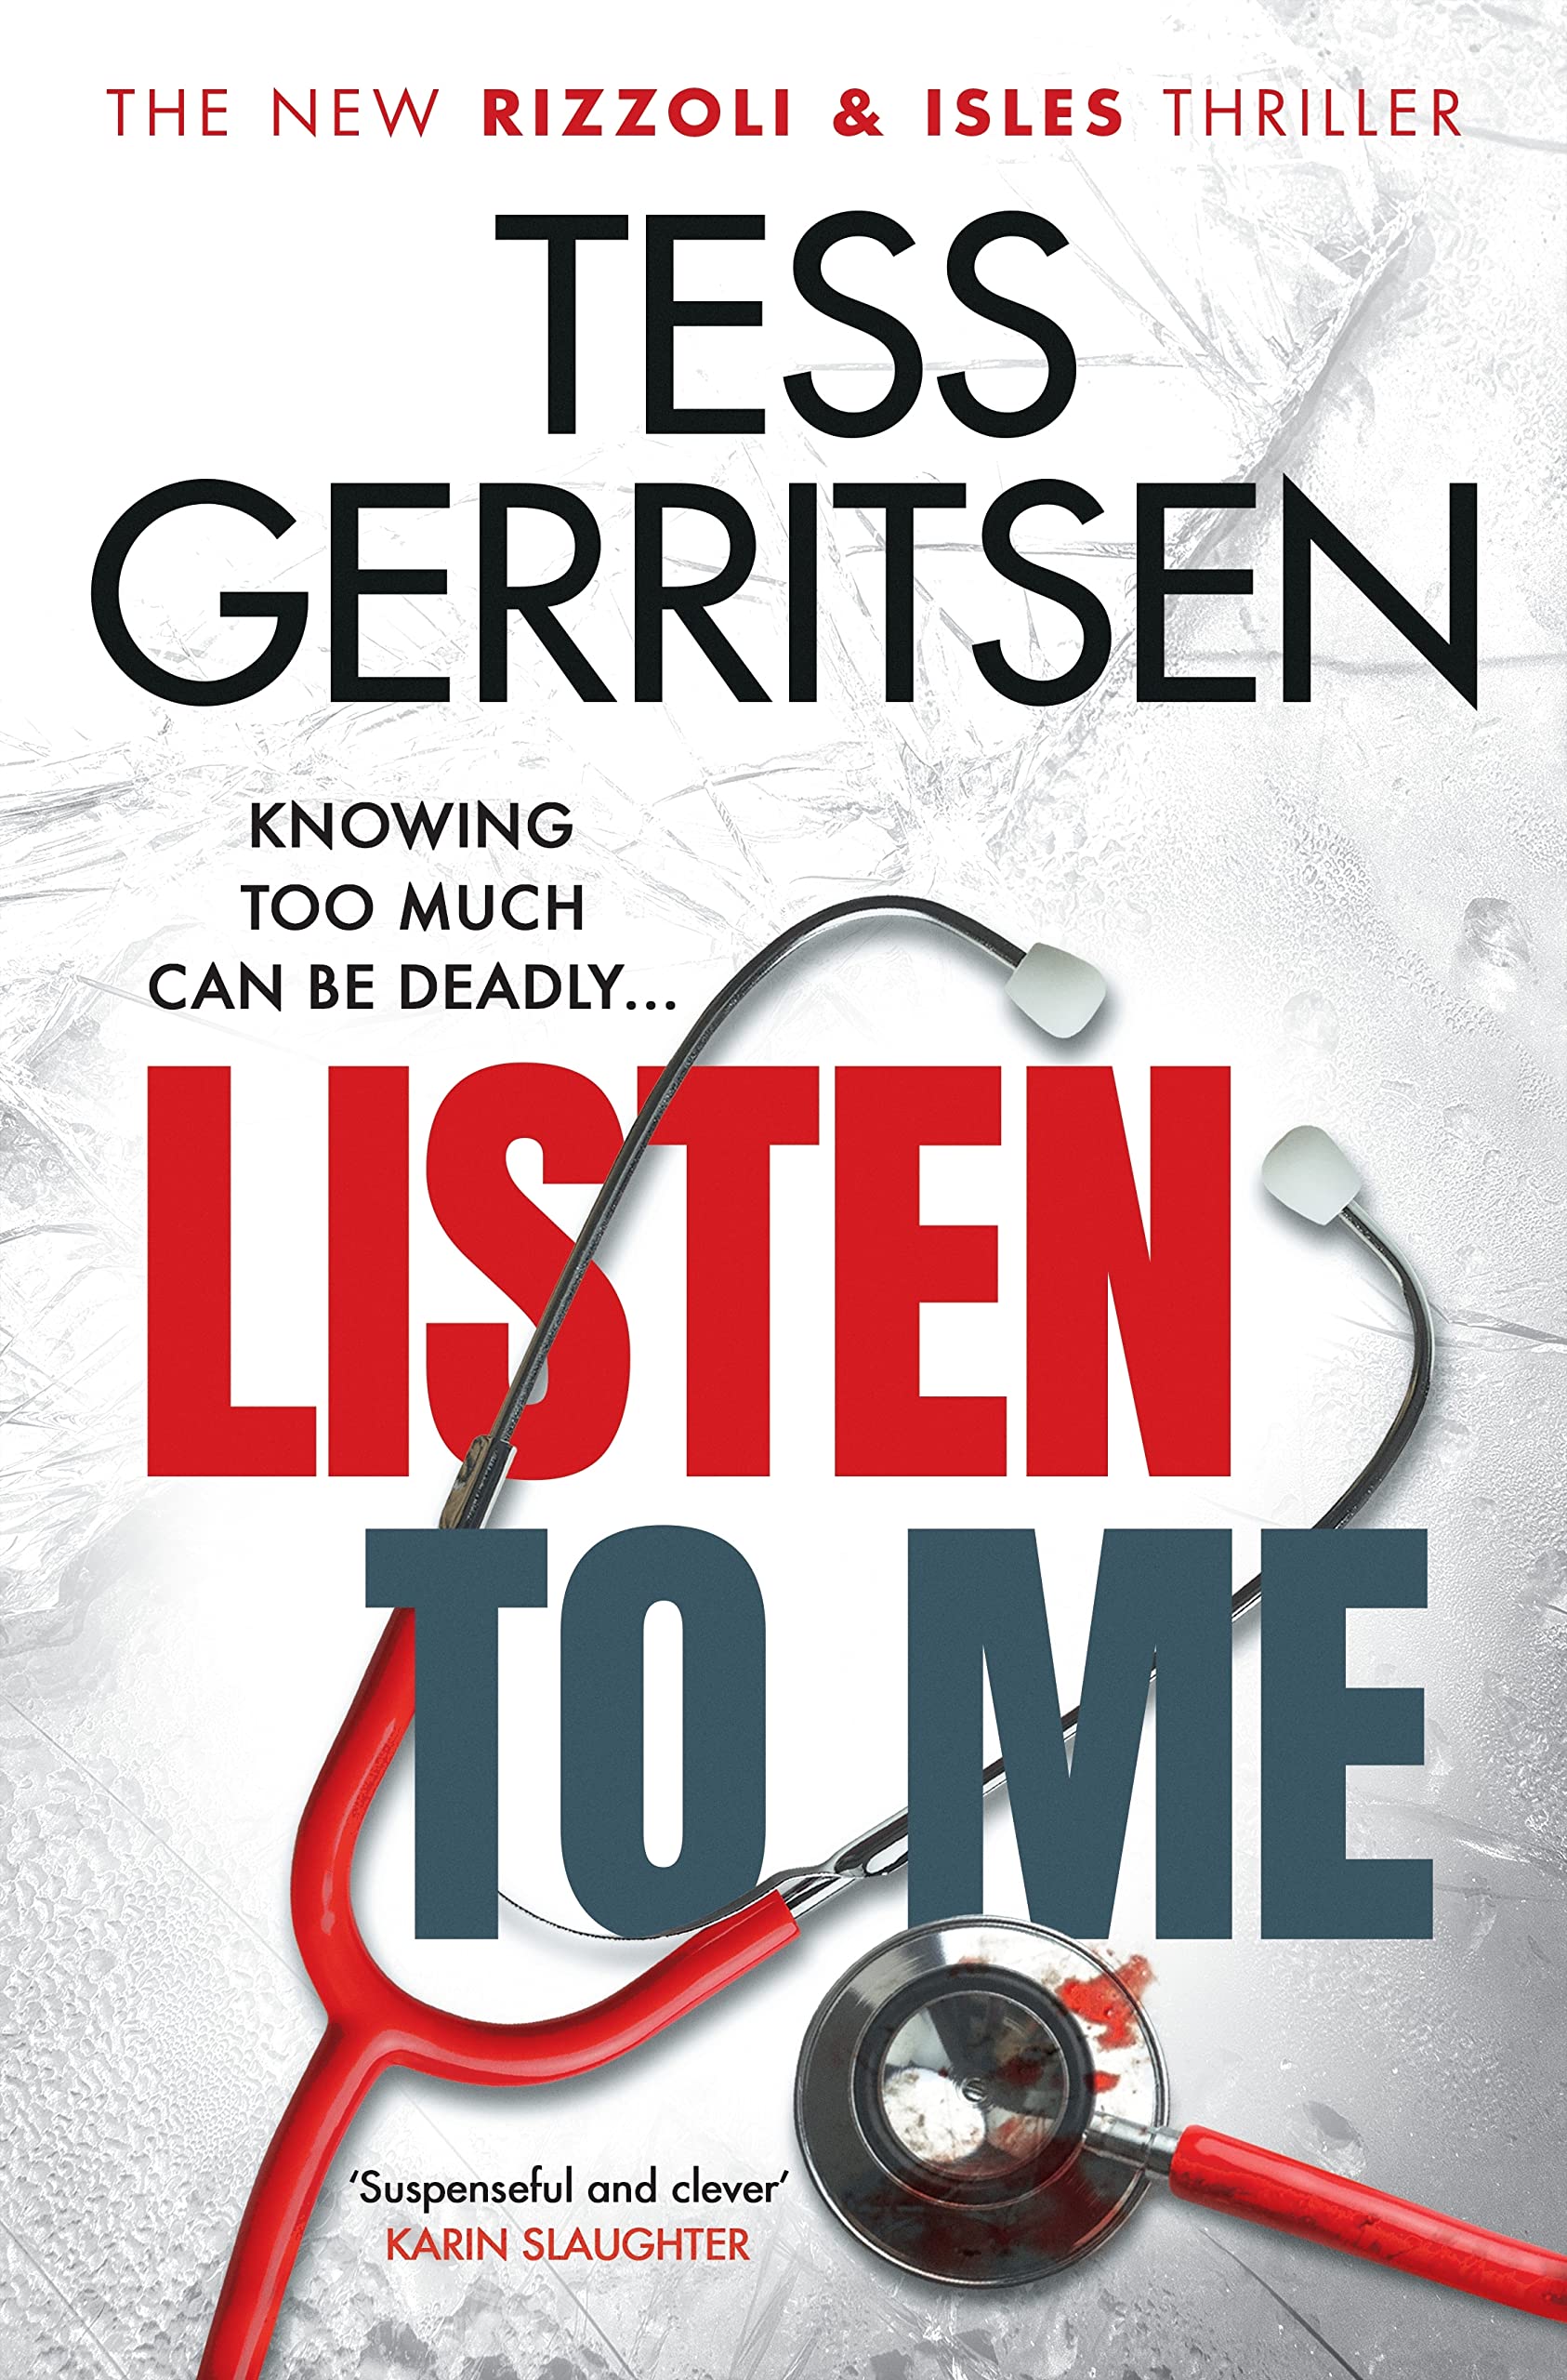 Book cover of Listen to Me by Tess Gerritsen, book 13 in the Rizzoli and Isles series